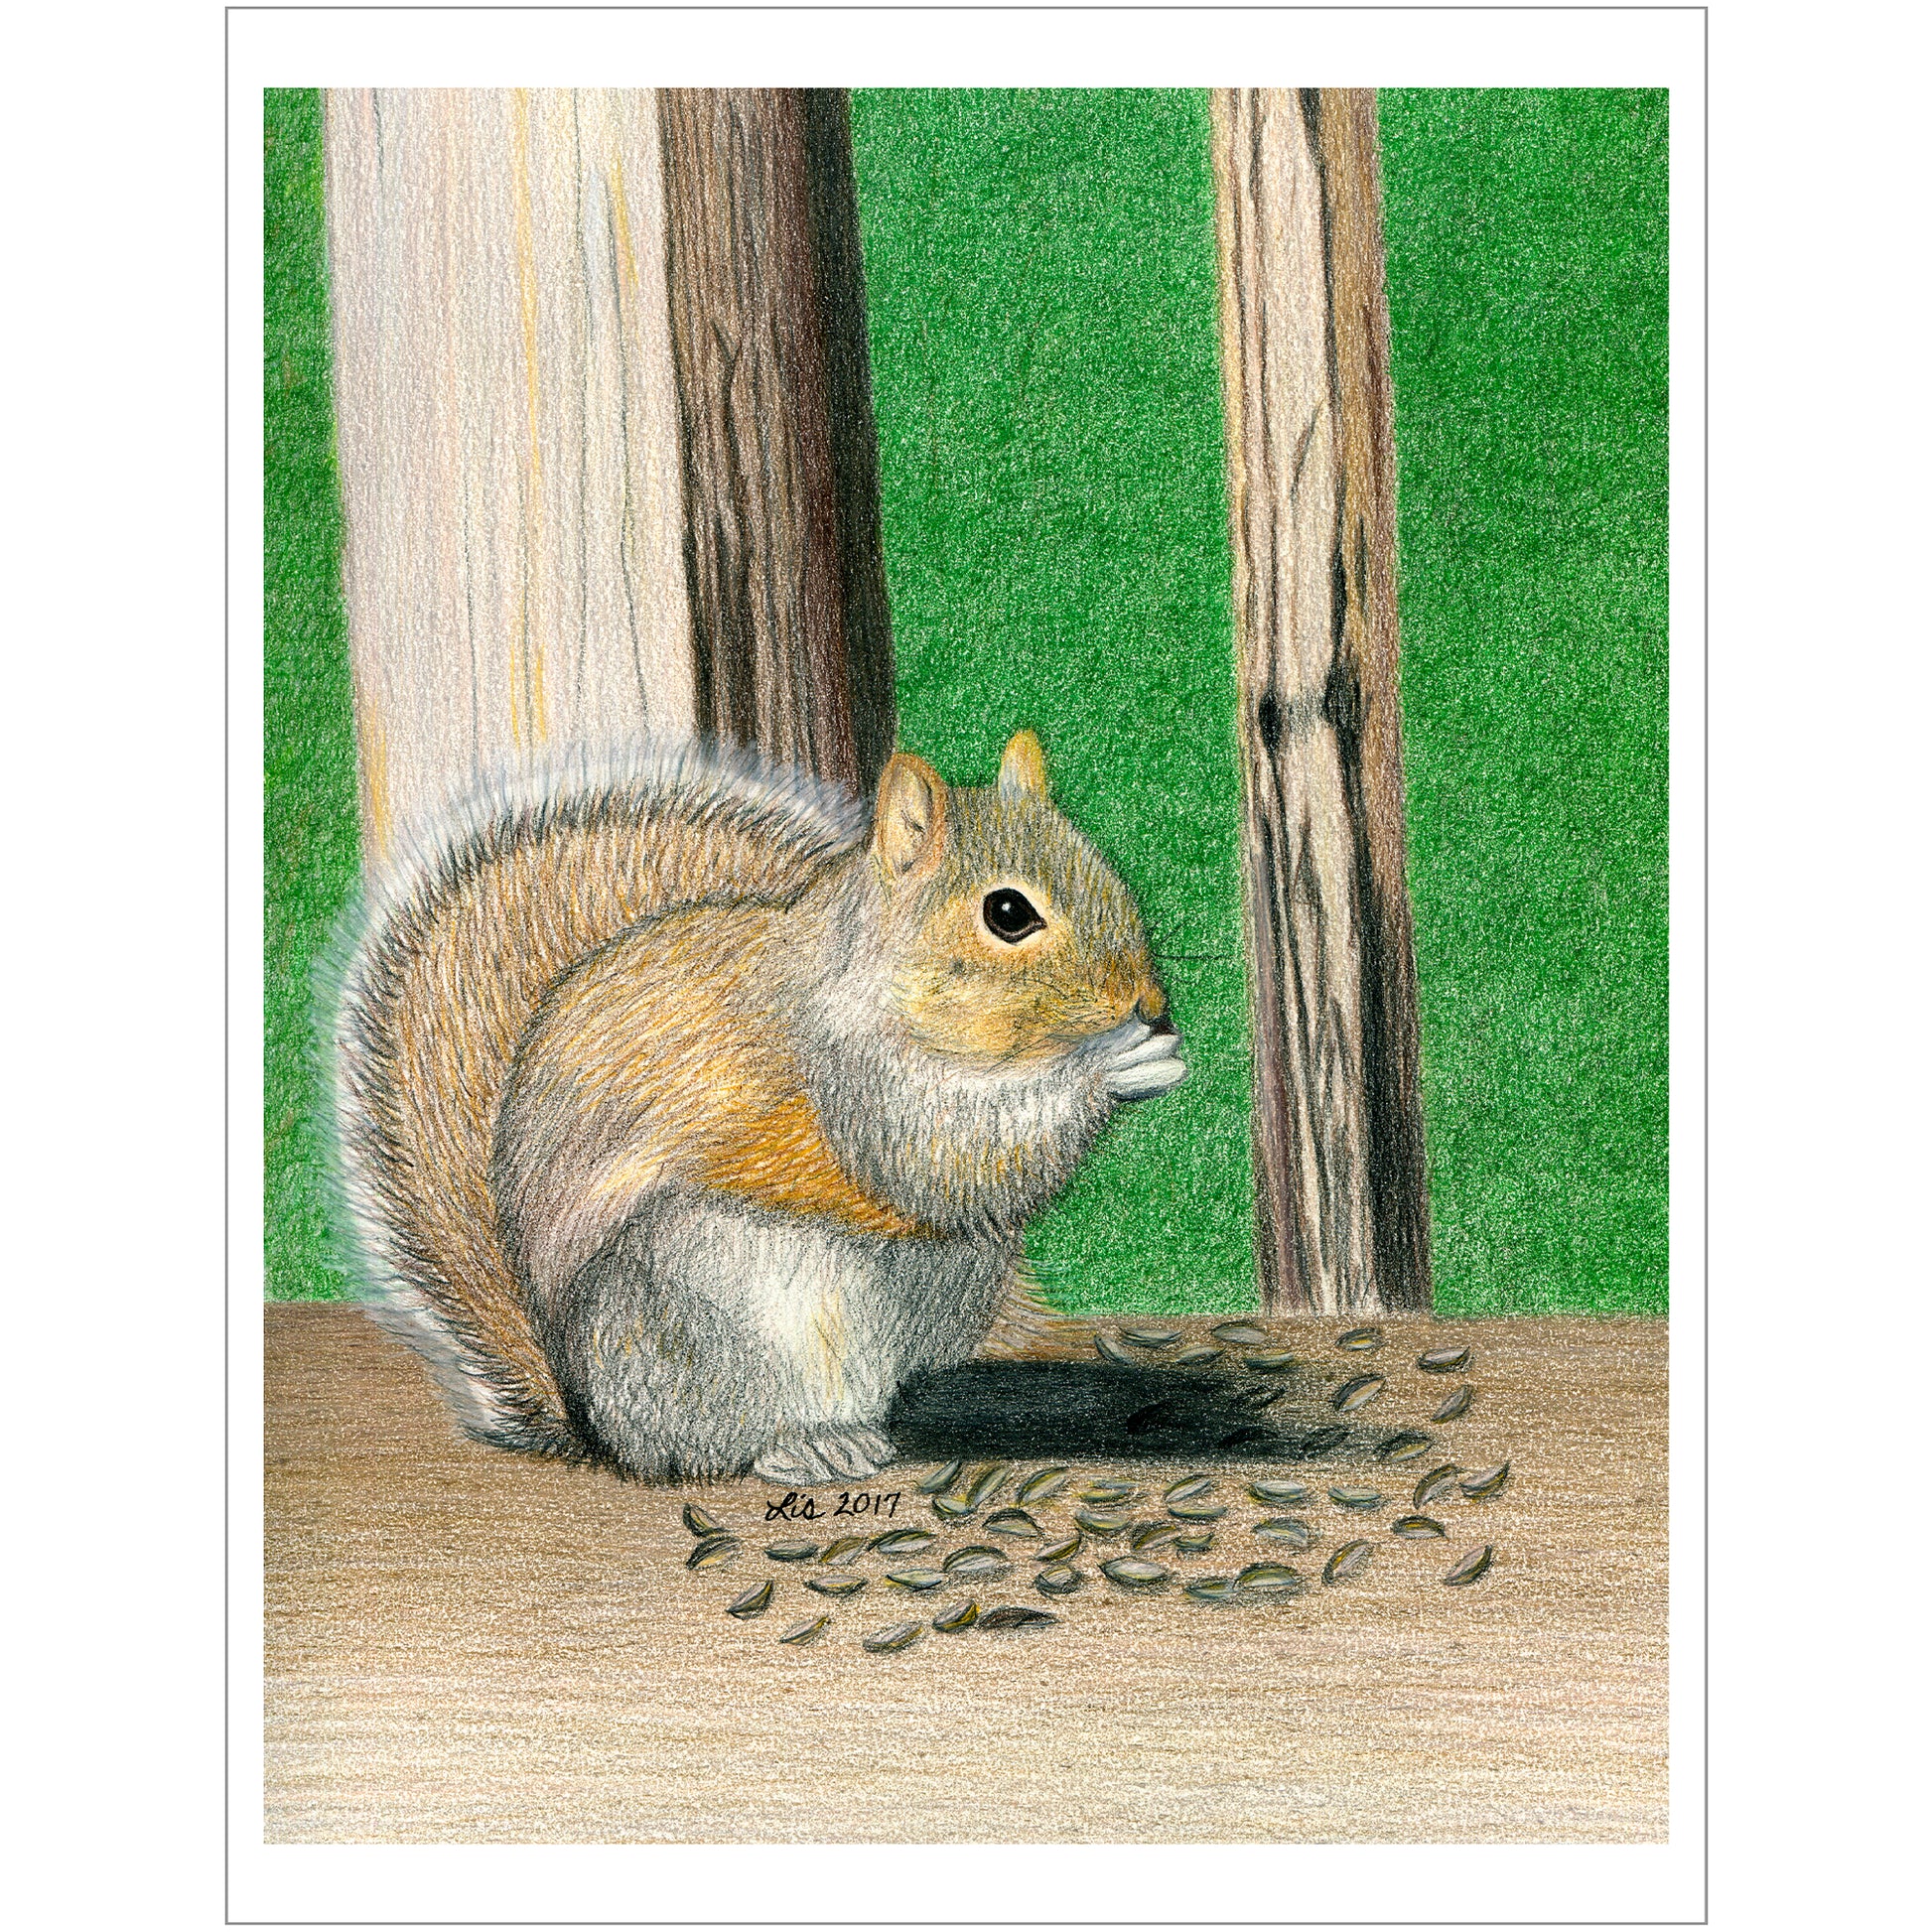 An eco-friendly art print featuring a colored pencil drawing of a cute squirrel enjoying a snack on a backyard deck.